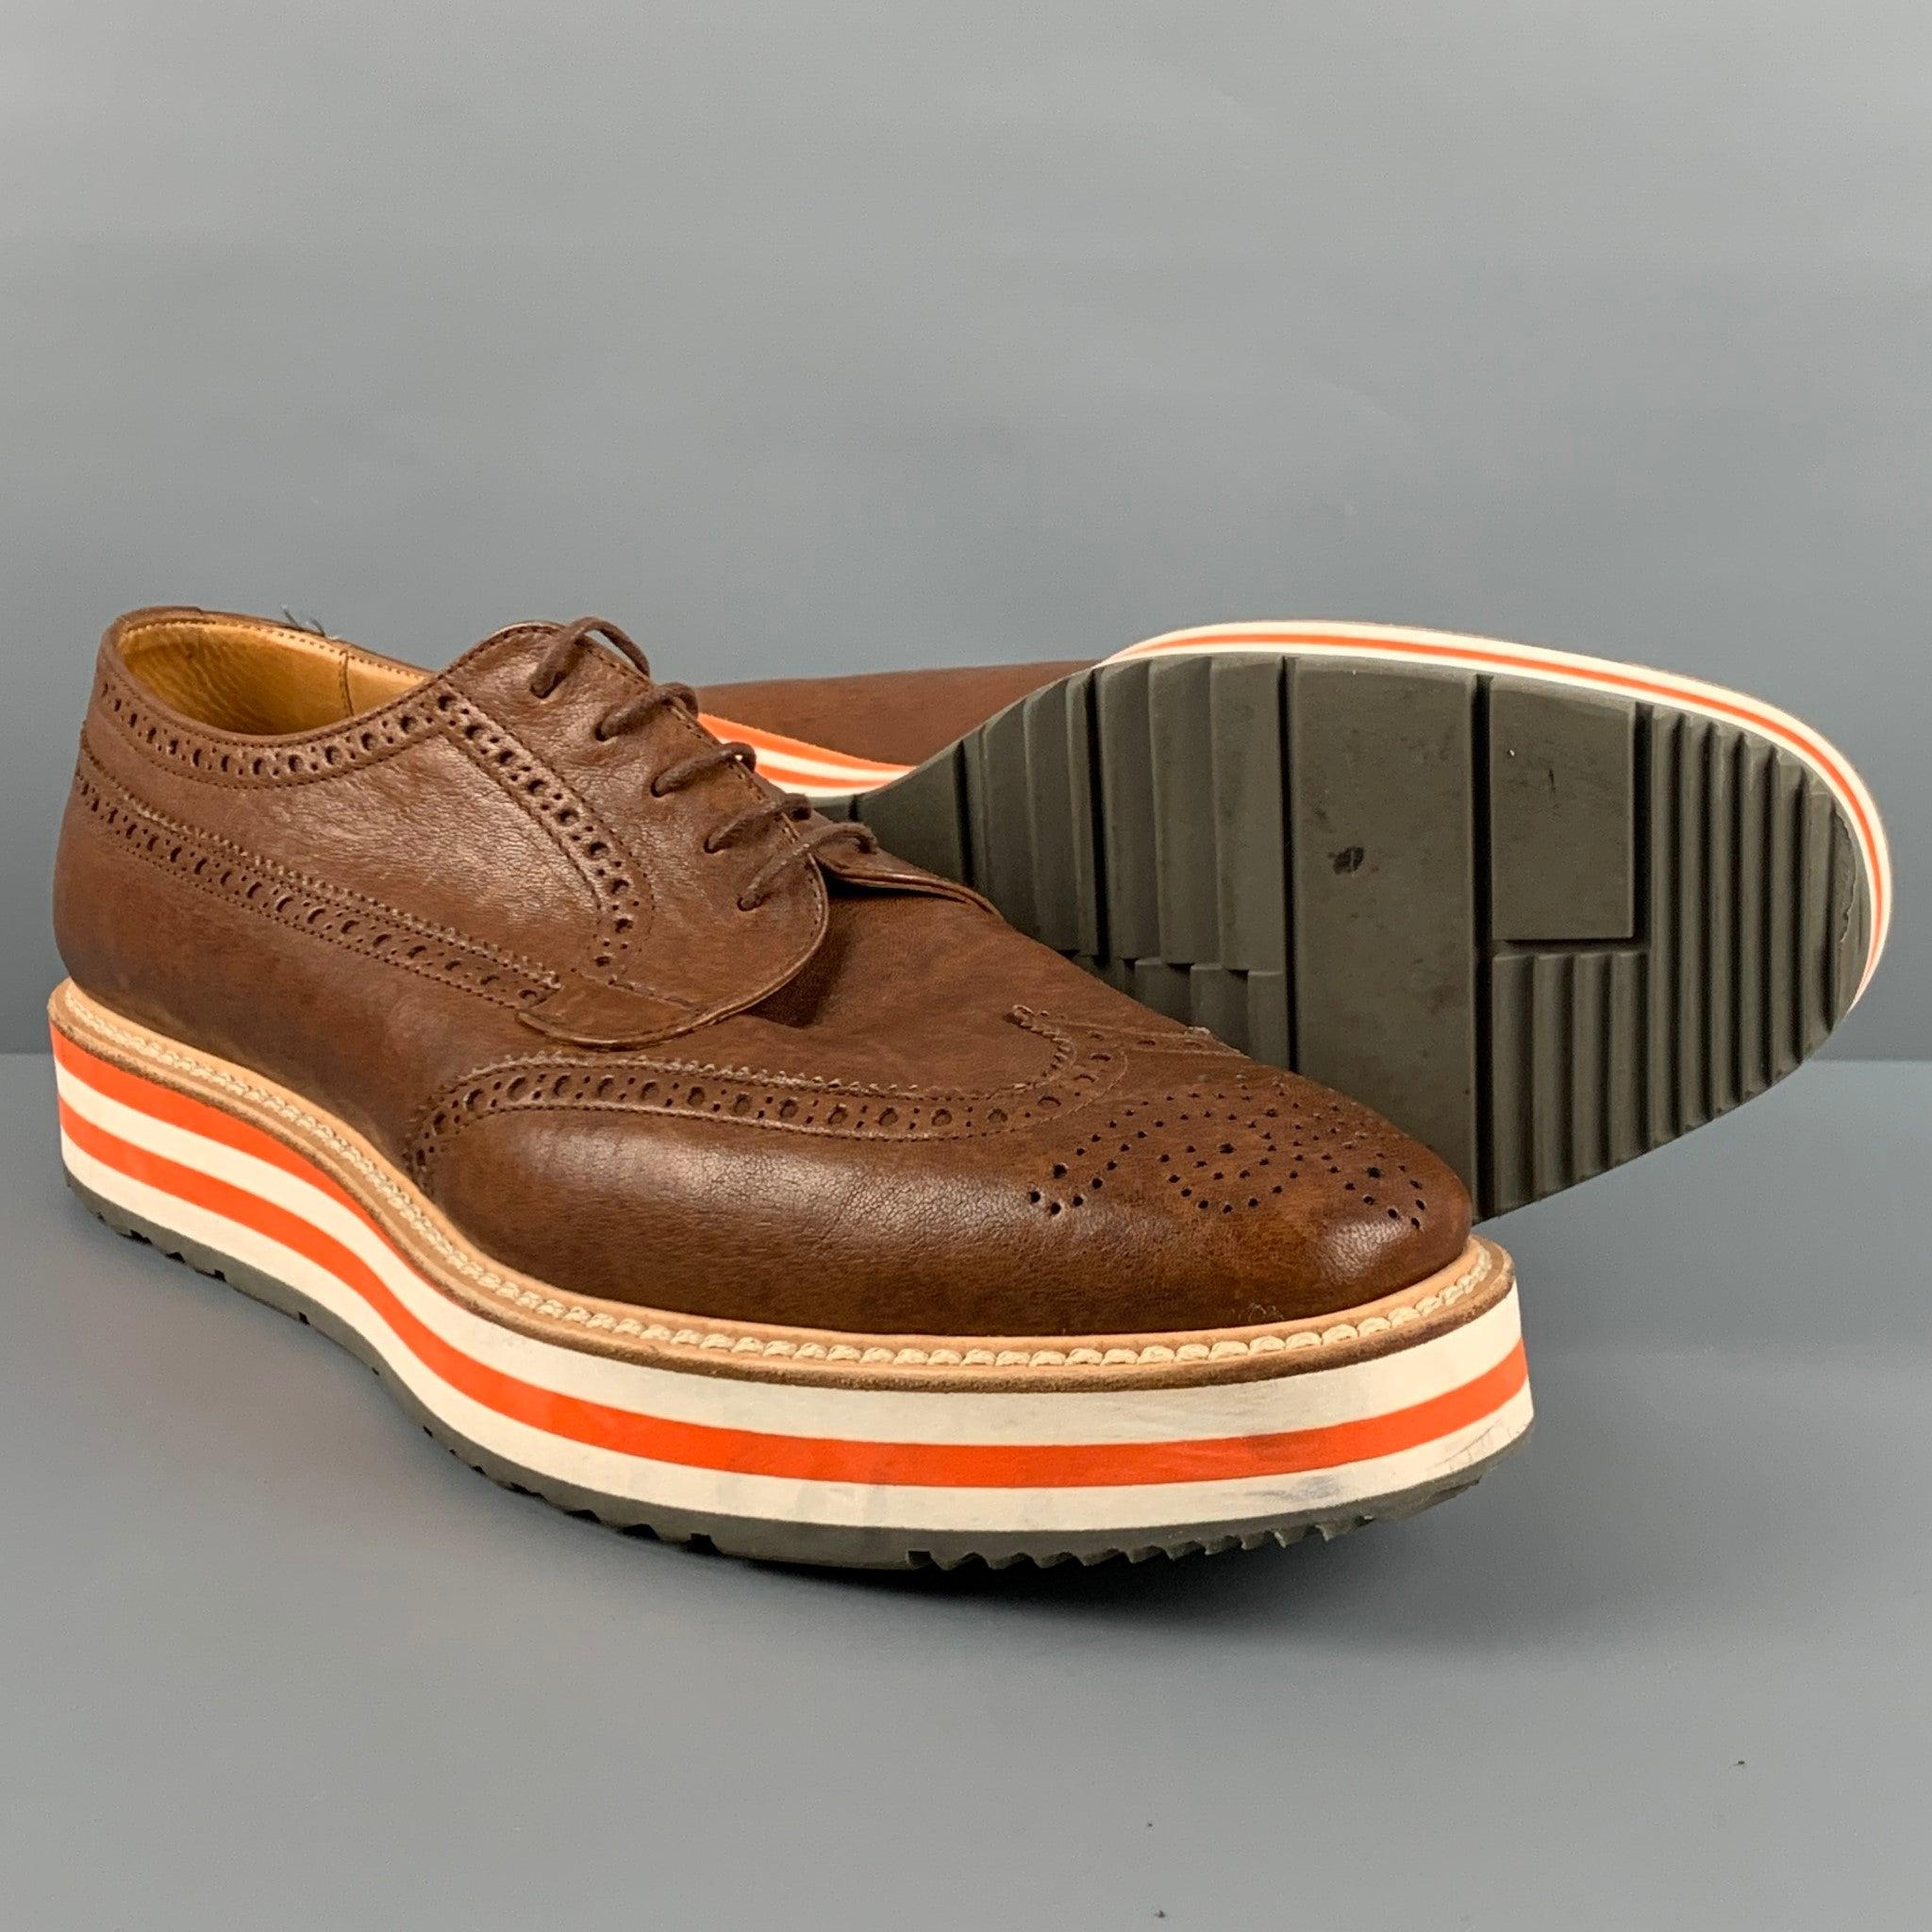 PRADA Size 9.5 Brown Perforated Leather Wingtip Lace Up Shoes For Sale 1